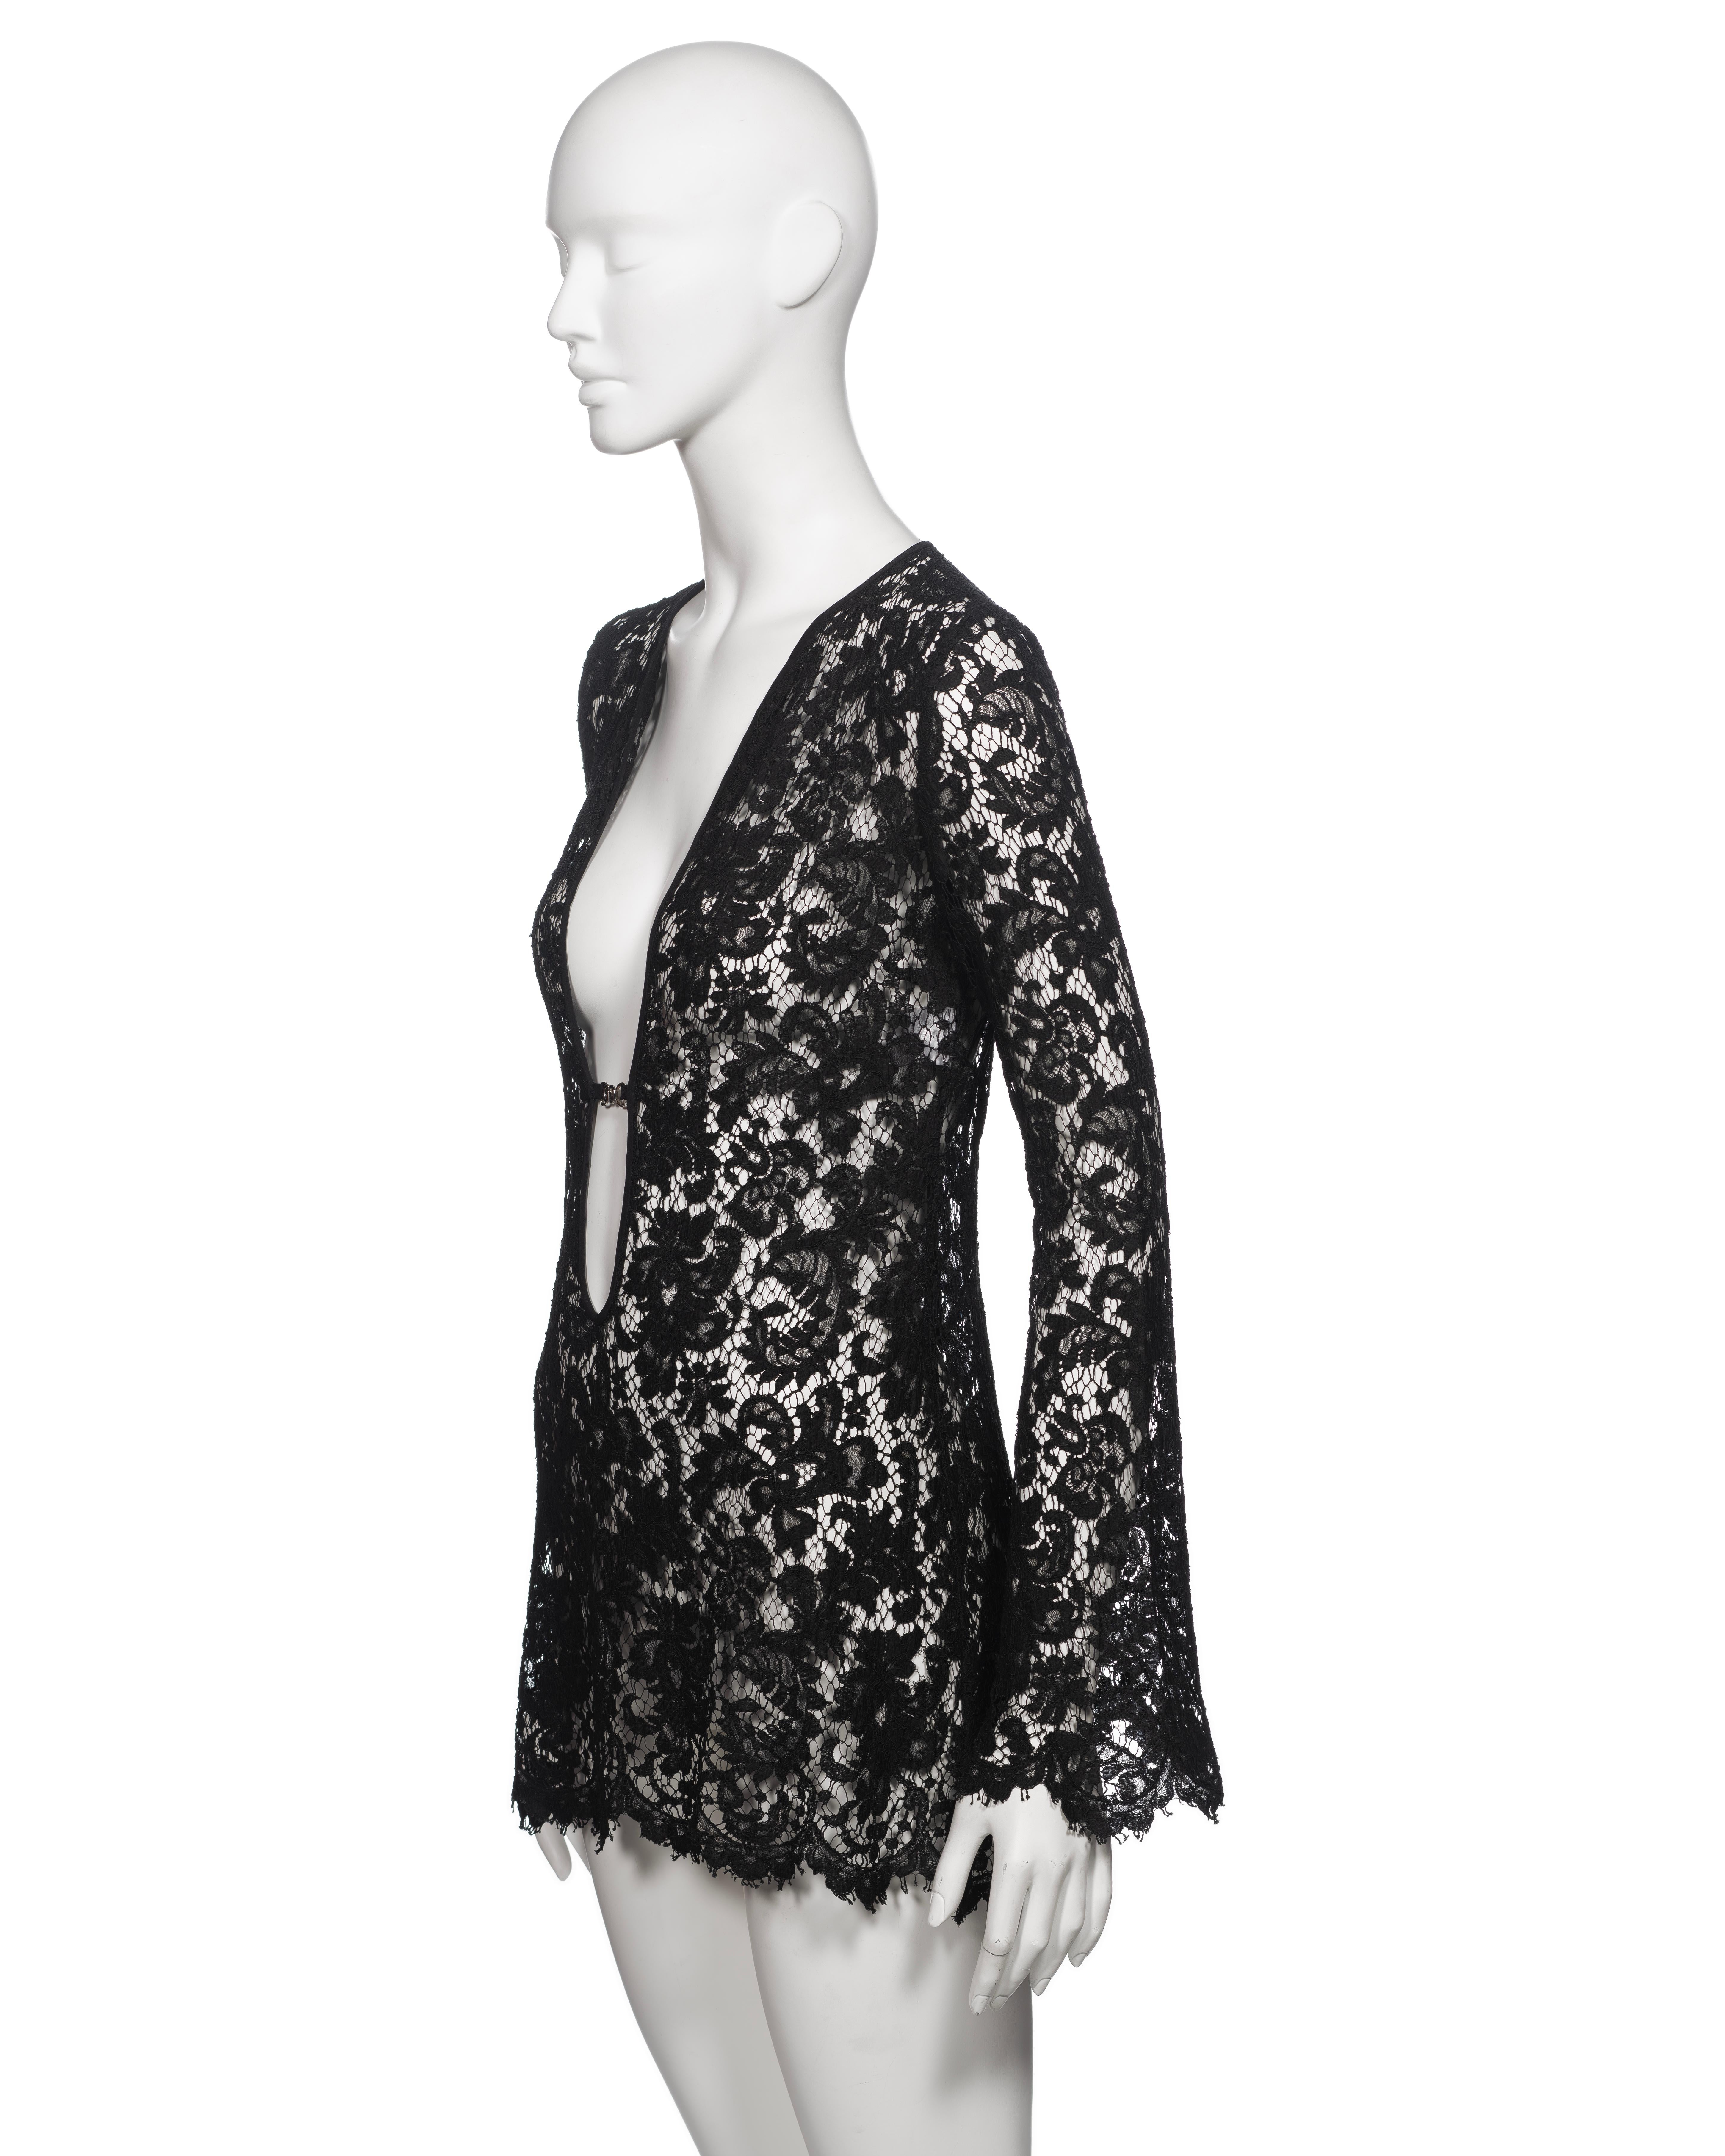 Gucci by Tom Ford Black Lace Long Sleeve Micro Mini Dress, SS 1996 For Sale 7